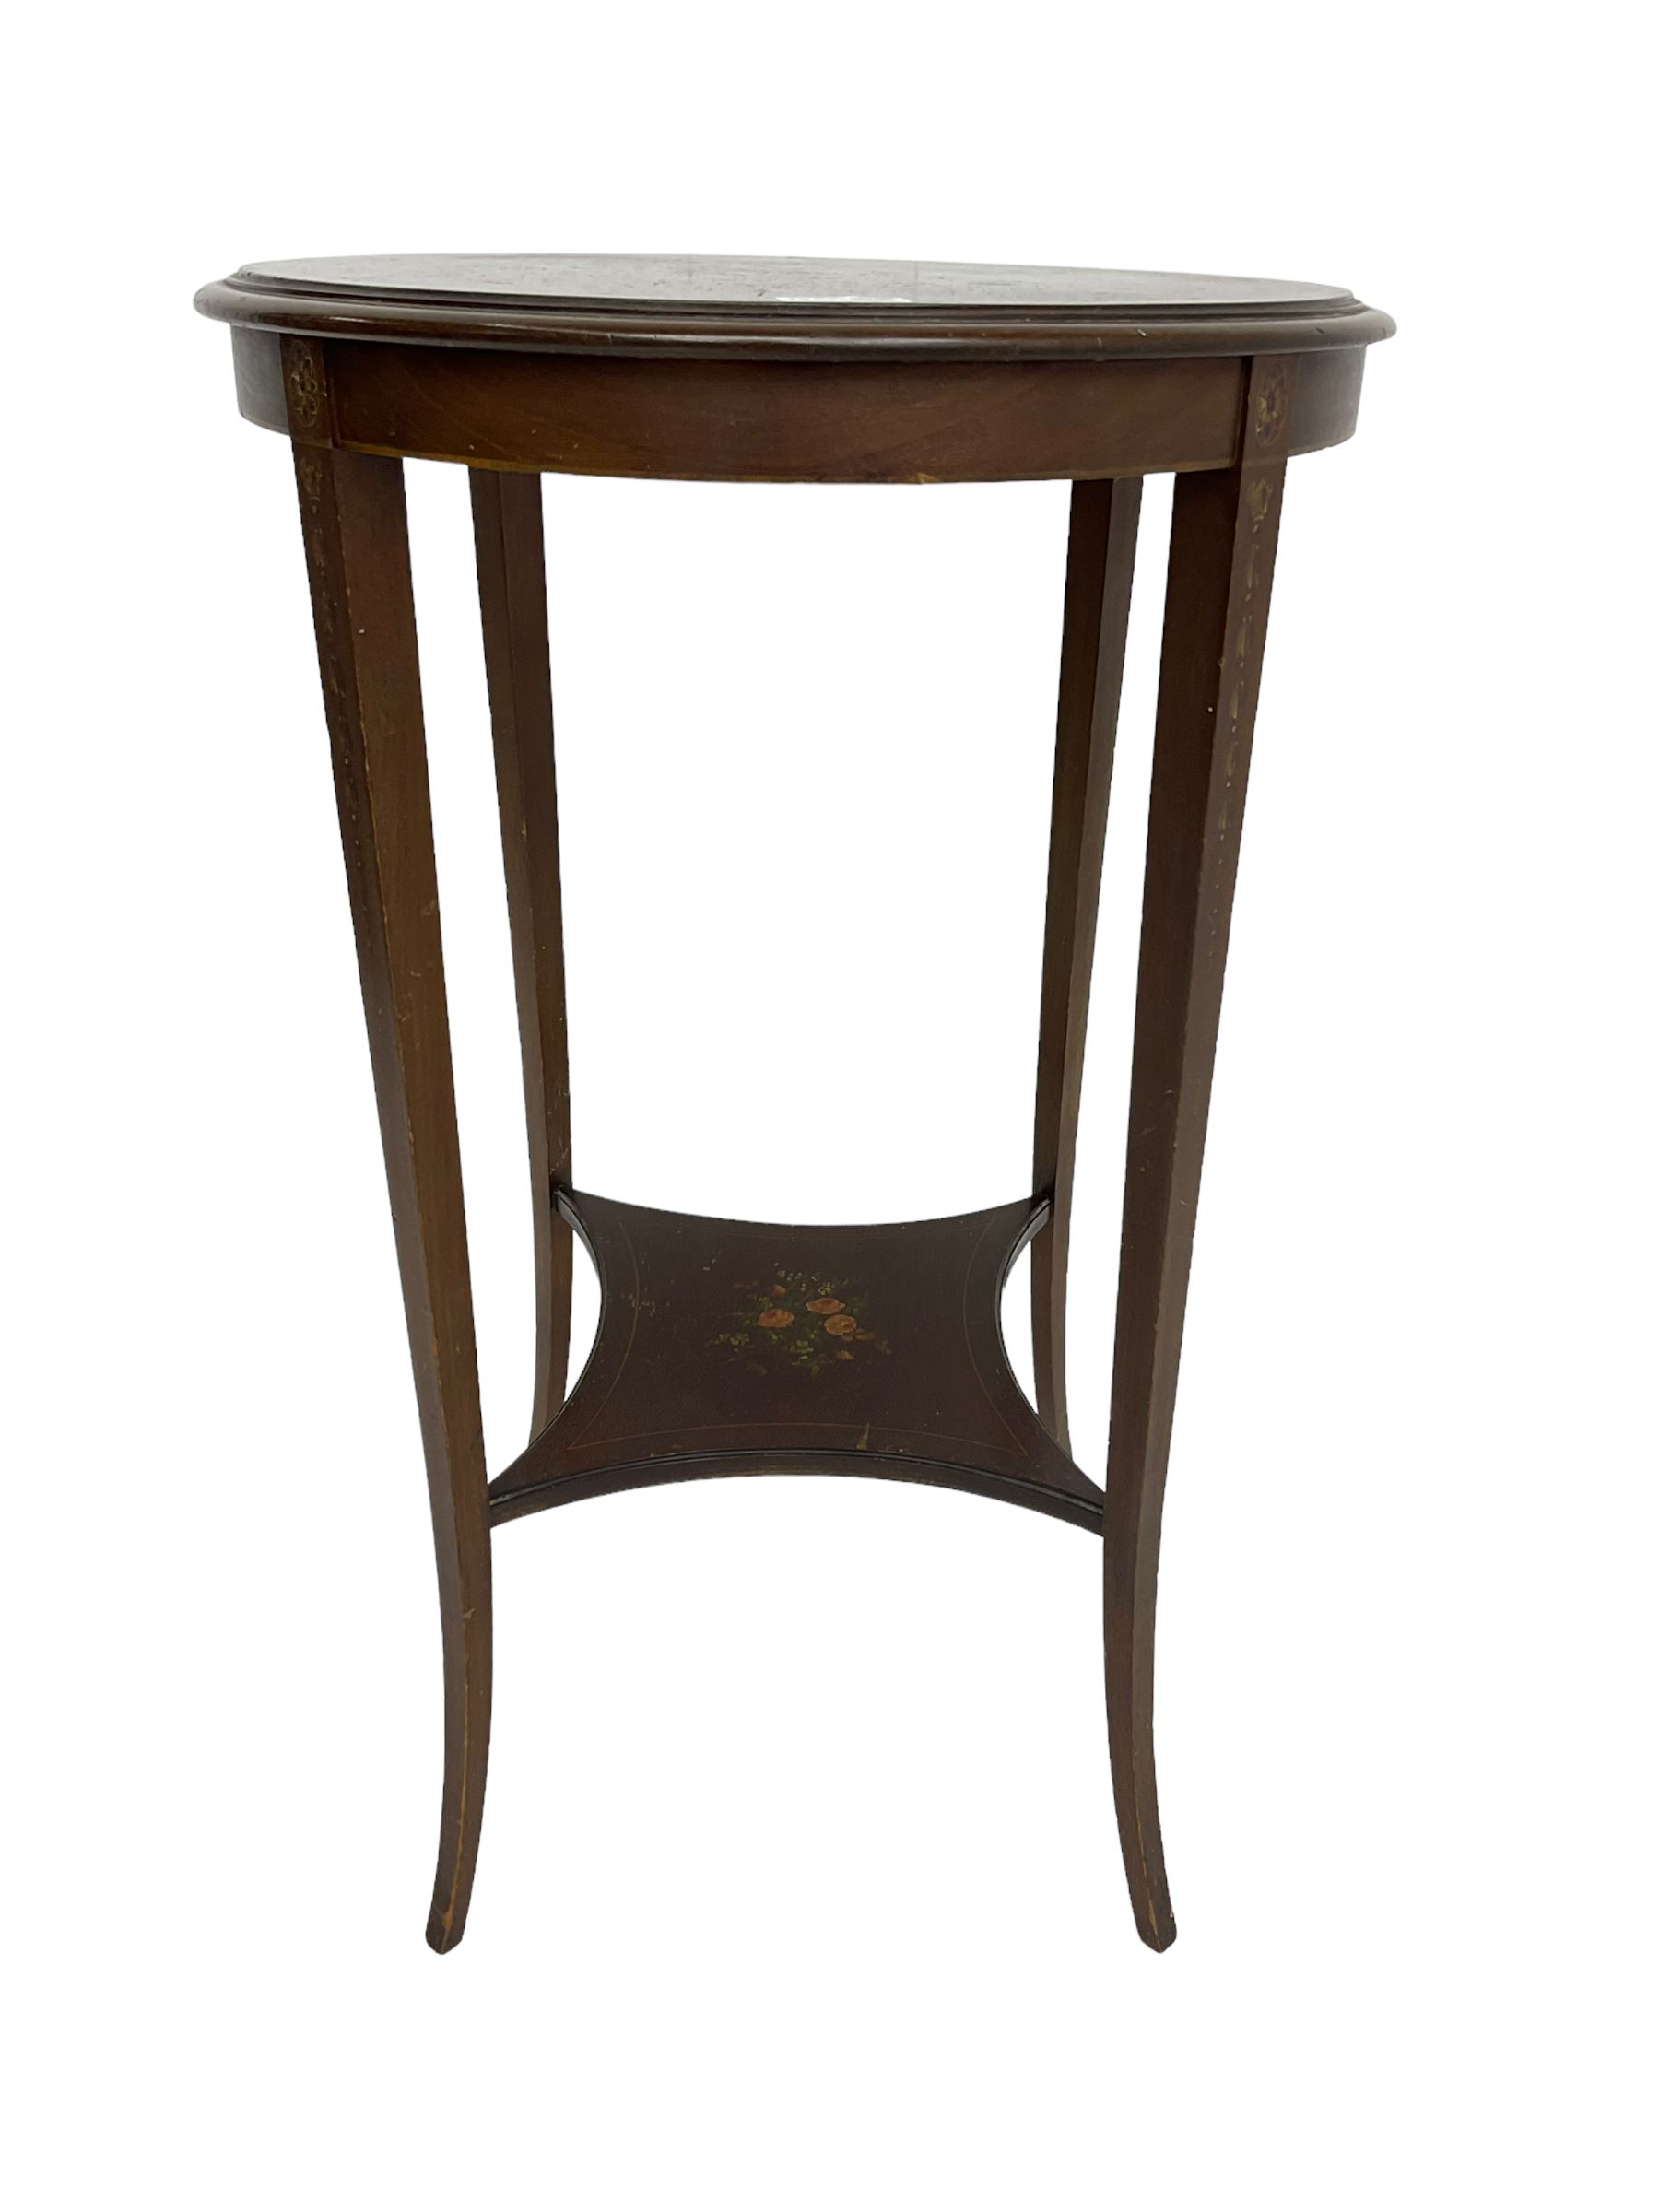 Greenwood and Sons York - early 20th century mahogany side or lamp table - Image 6 of 6